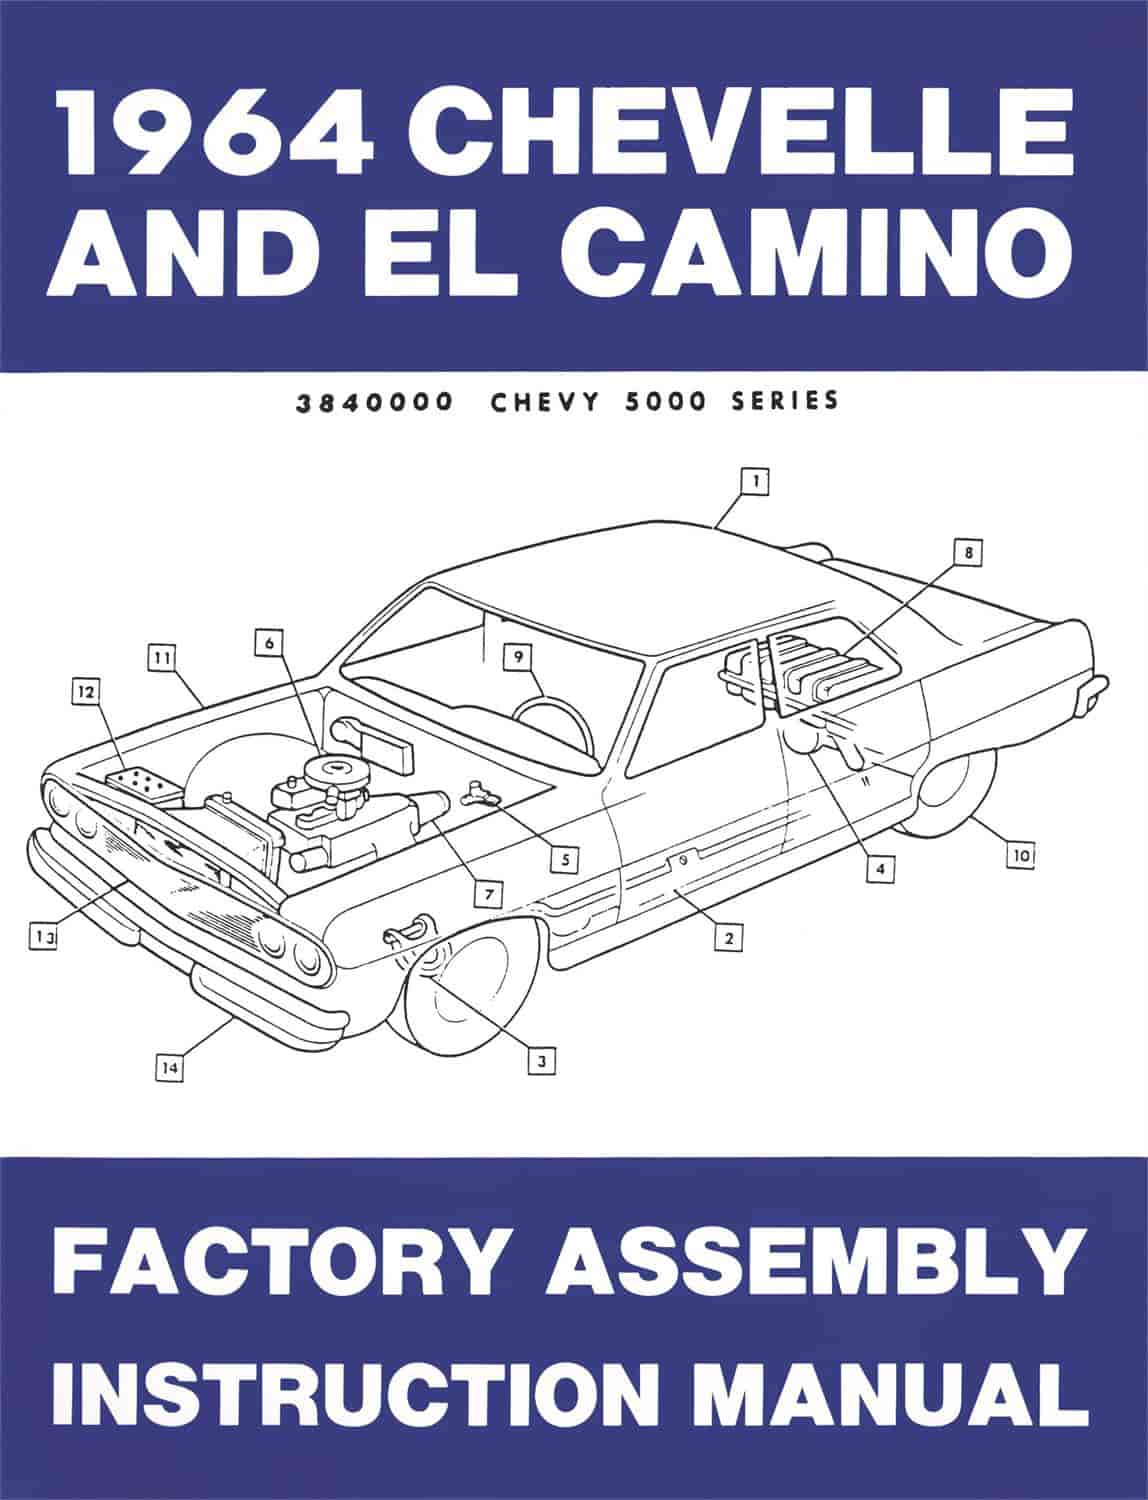 Factory Assembly Manual 1964 Chevy Chevelle & El